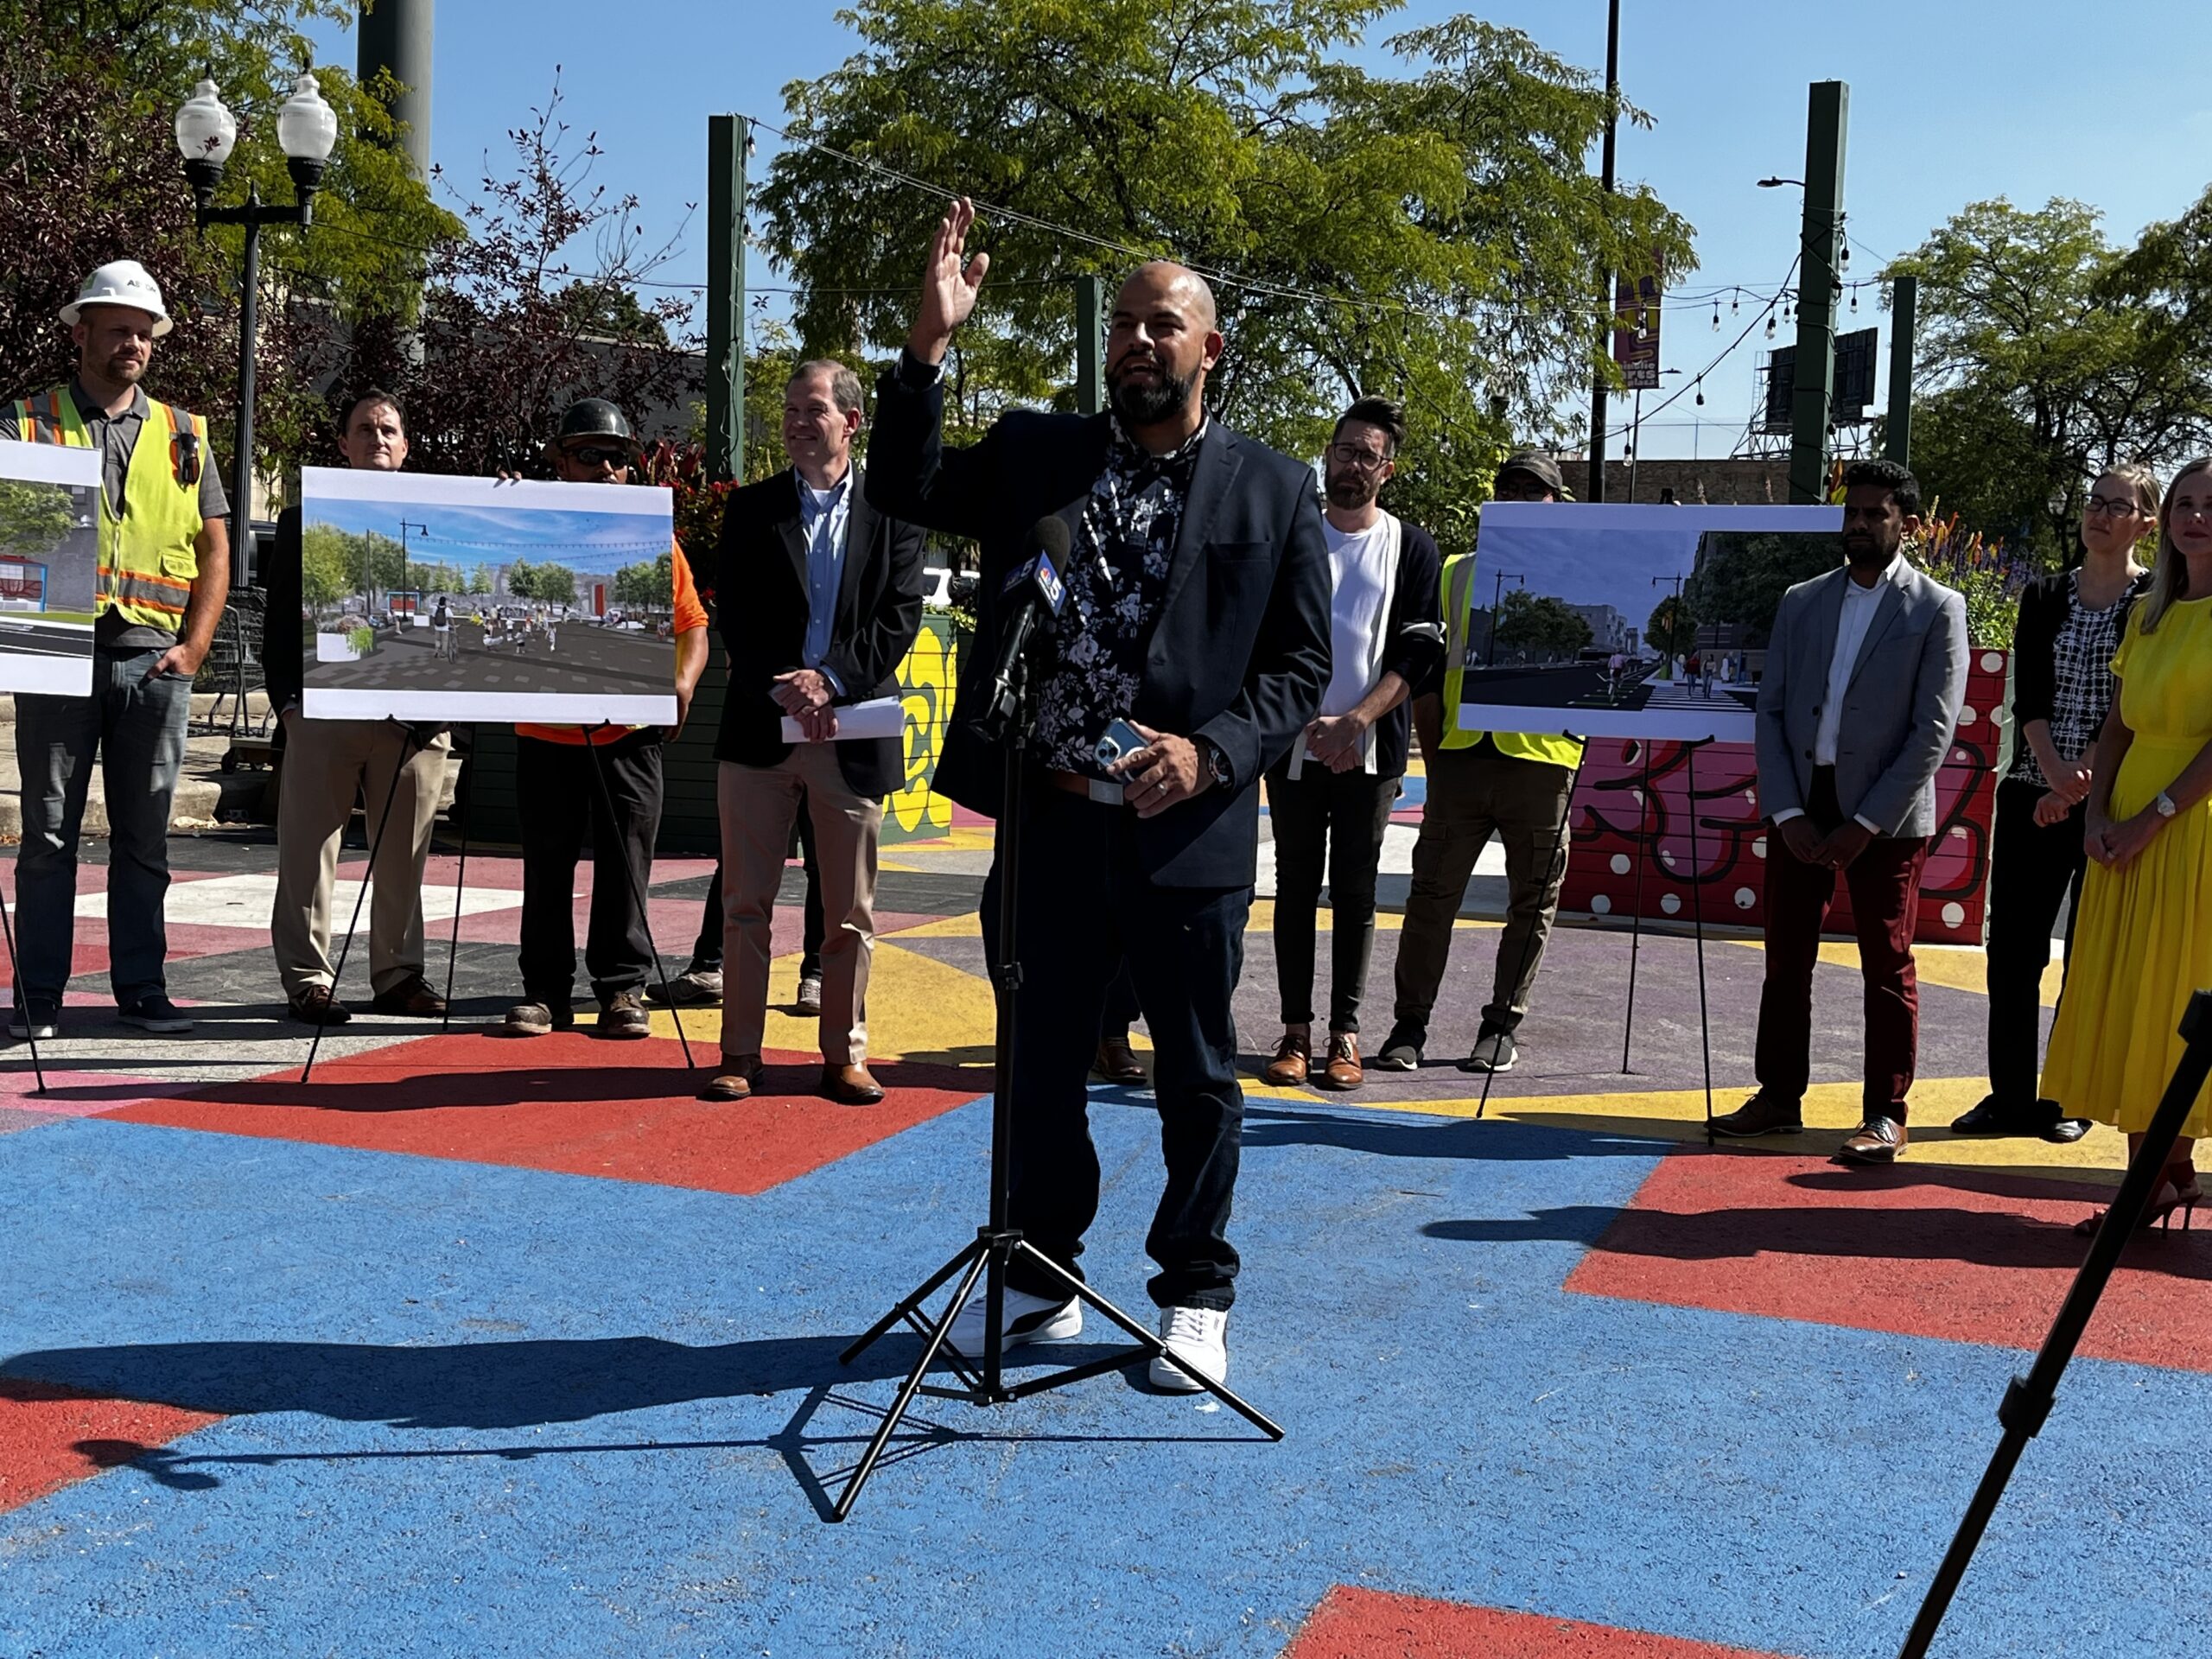 Ald. Vasquez giving a speech at the Ainslie Arts Plaza for the groundbreaking of Lincoln Ave Streetscape